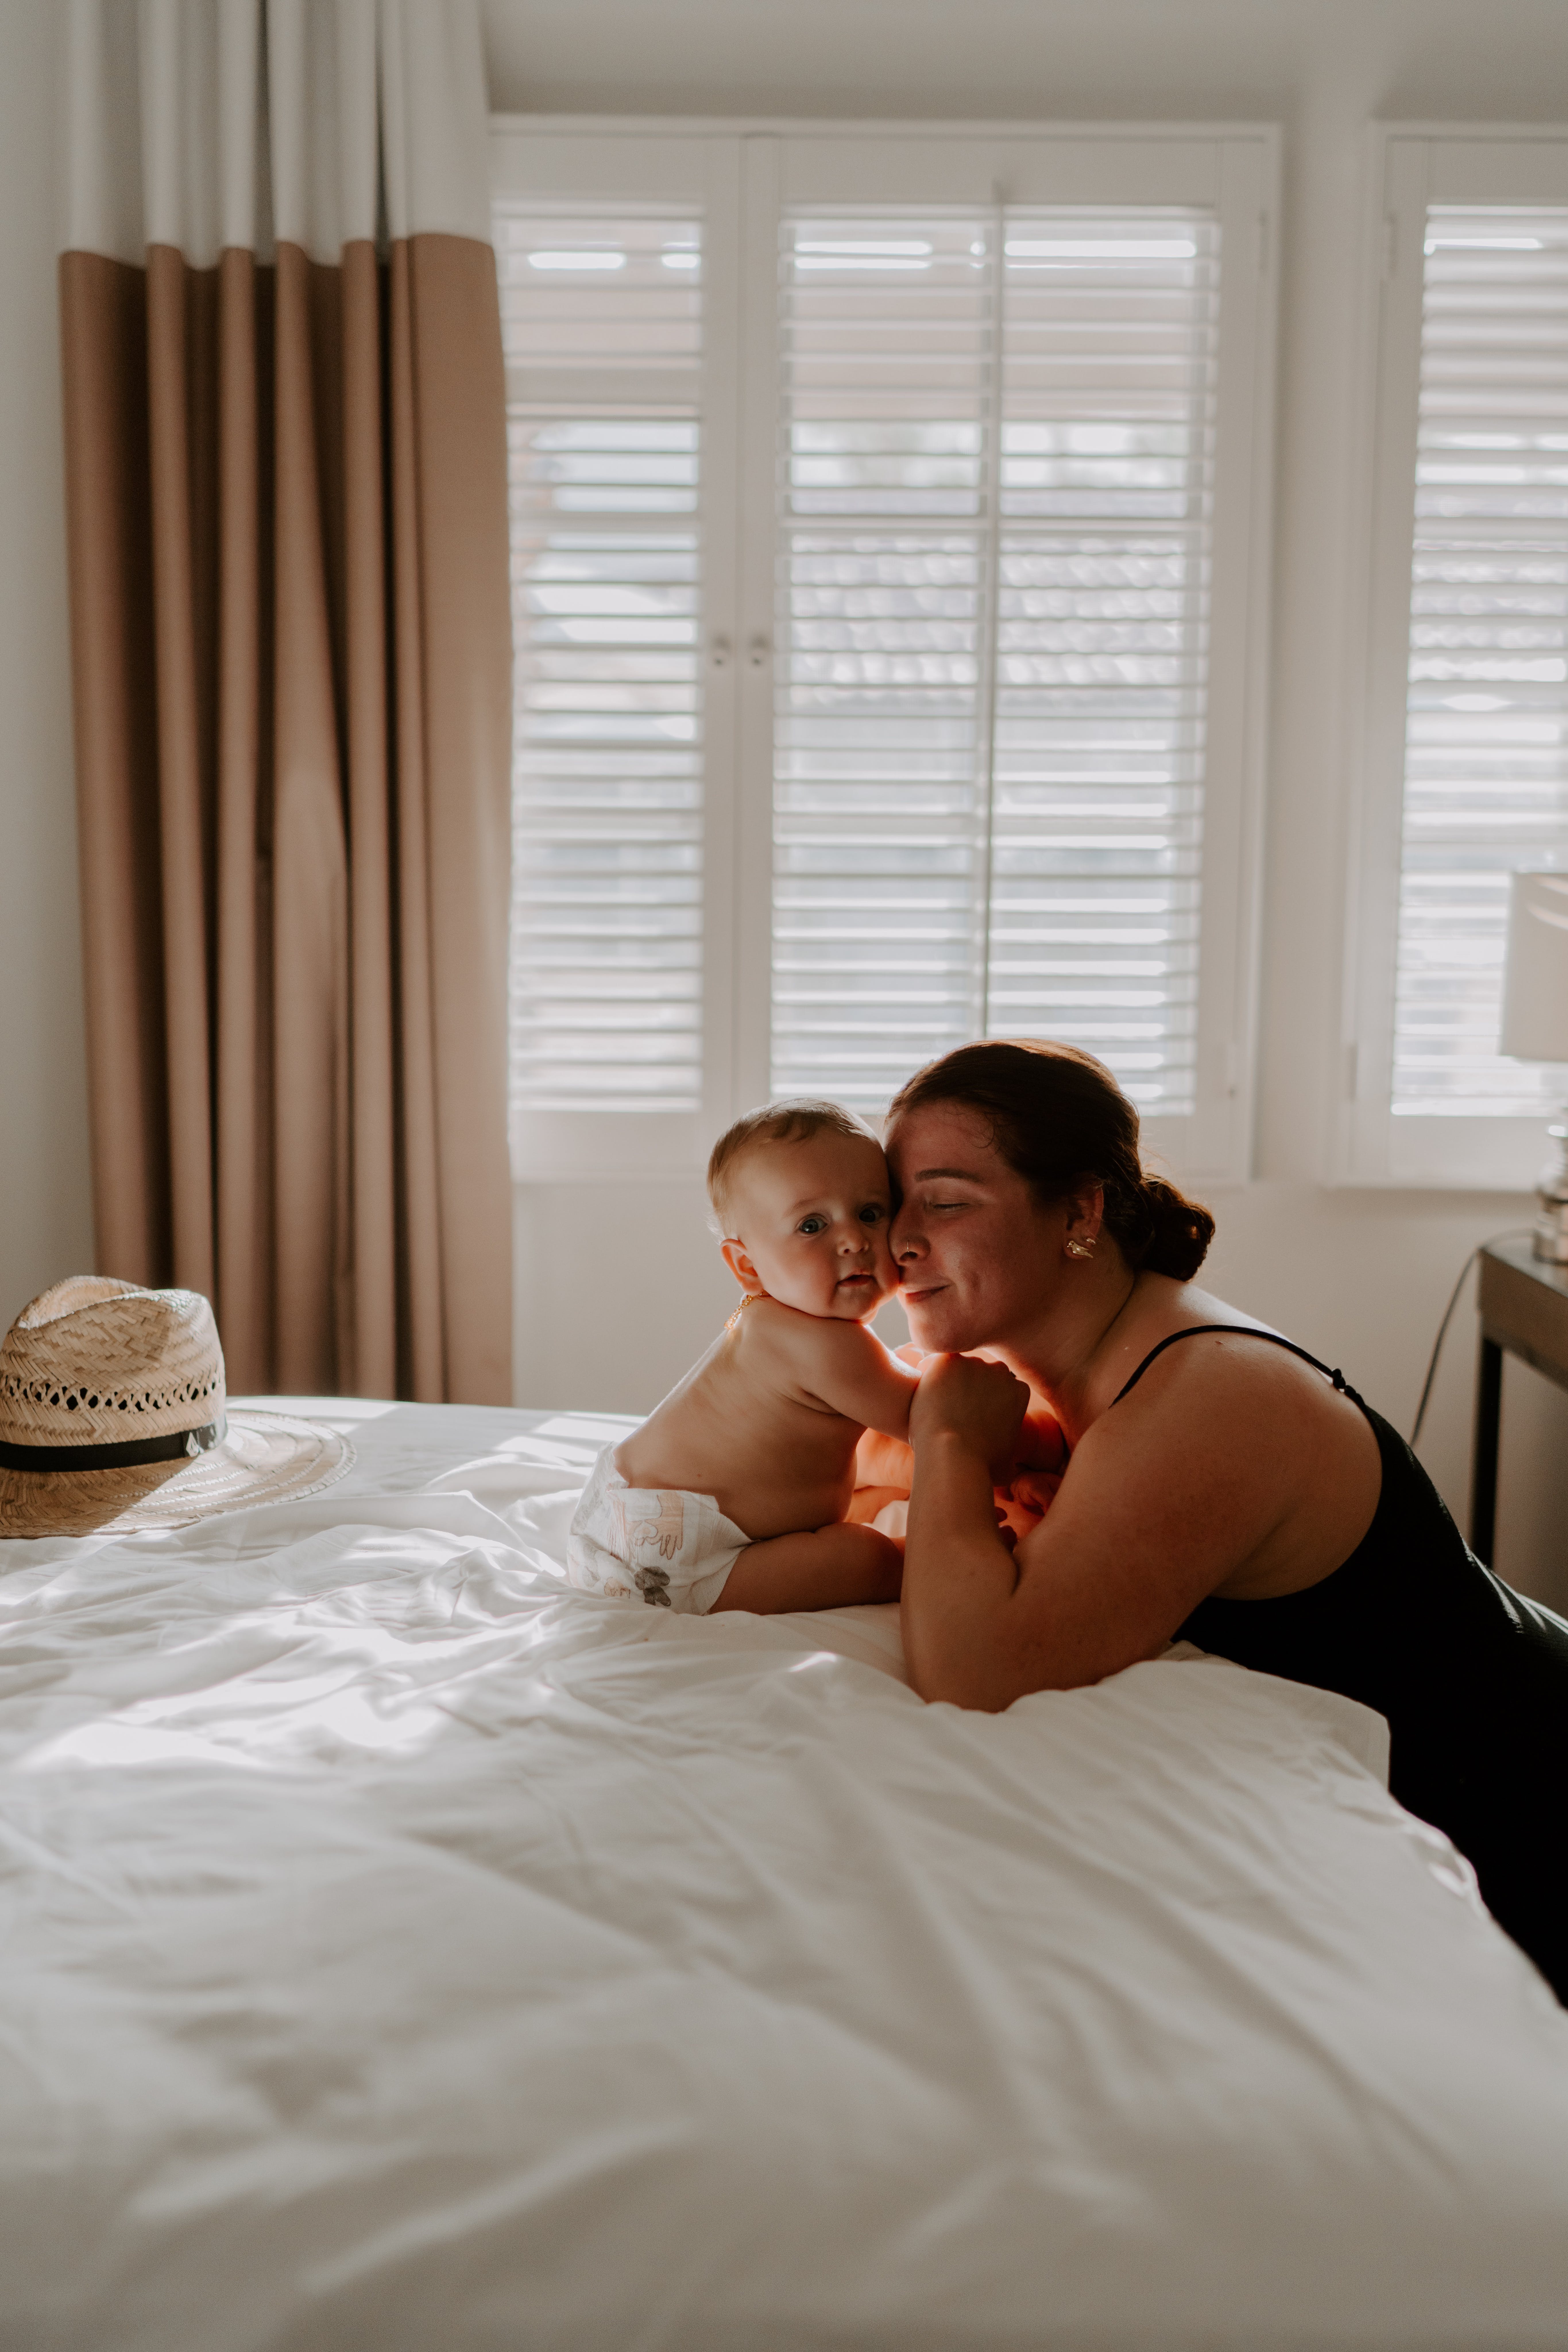 A woman with a baby in bed | Source: Pexels